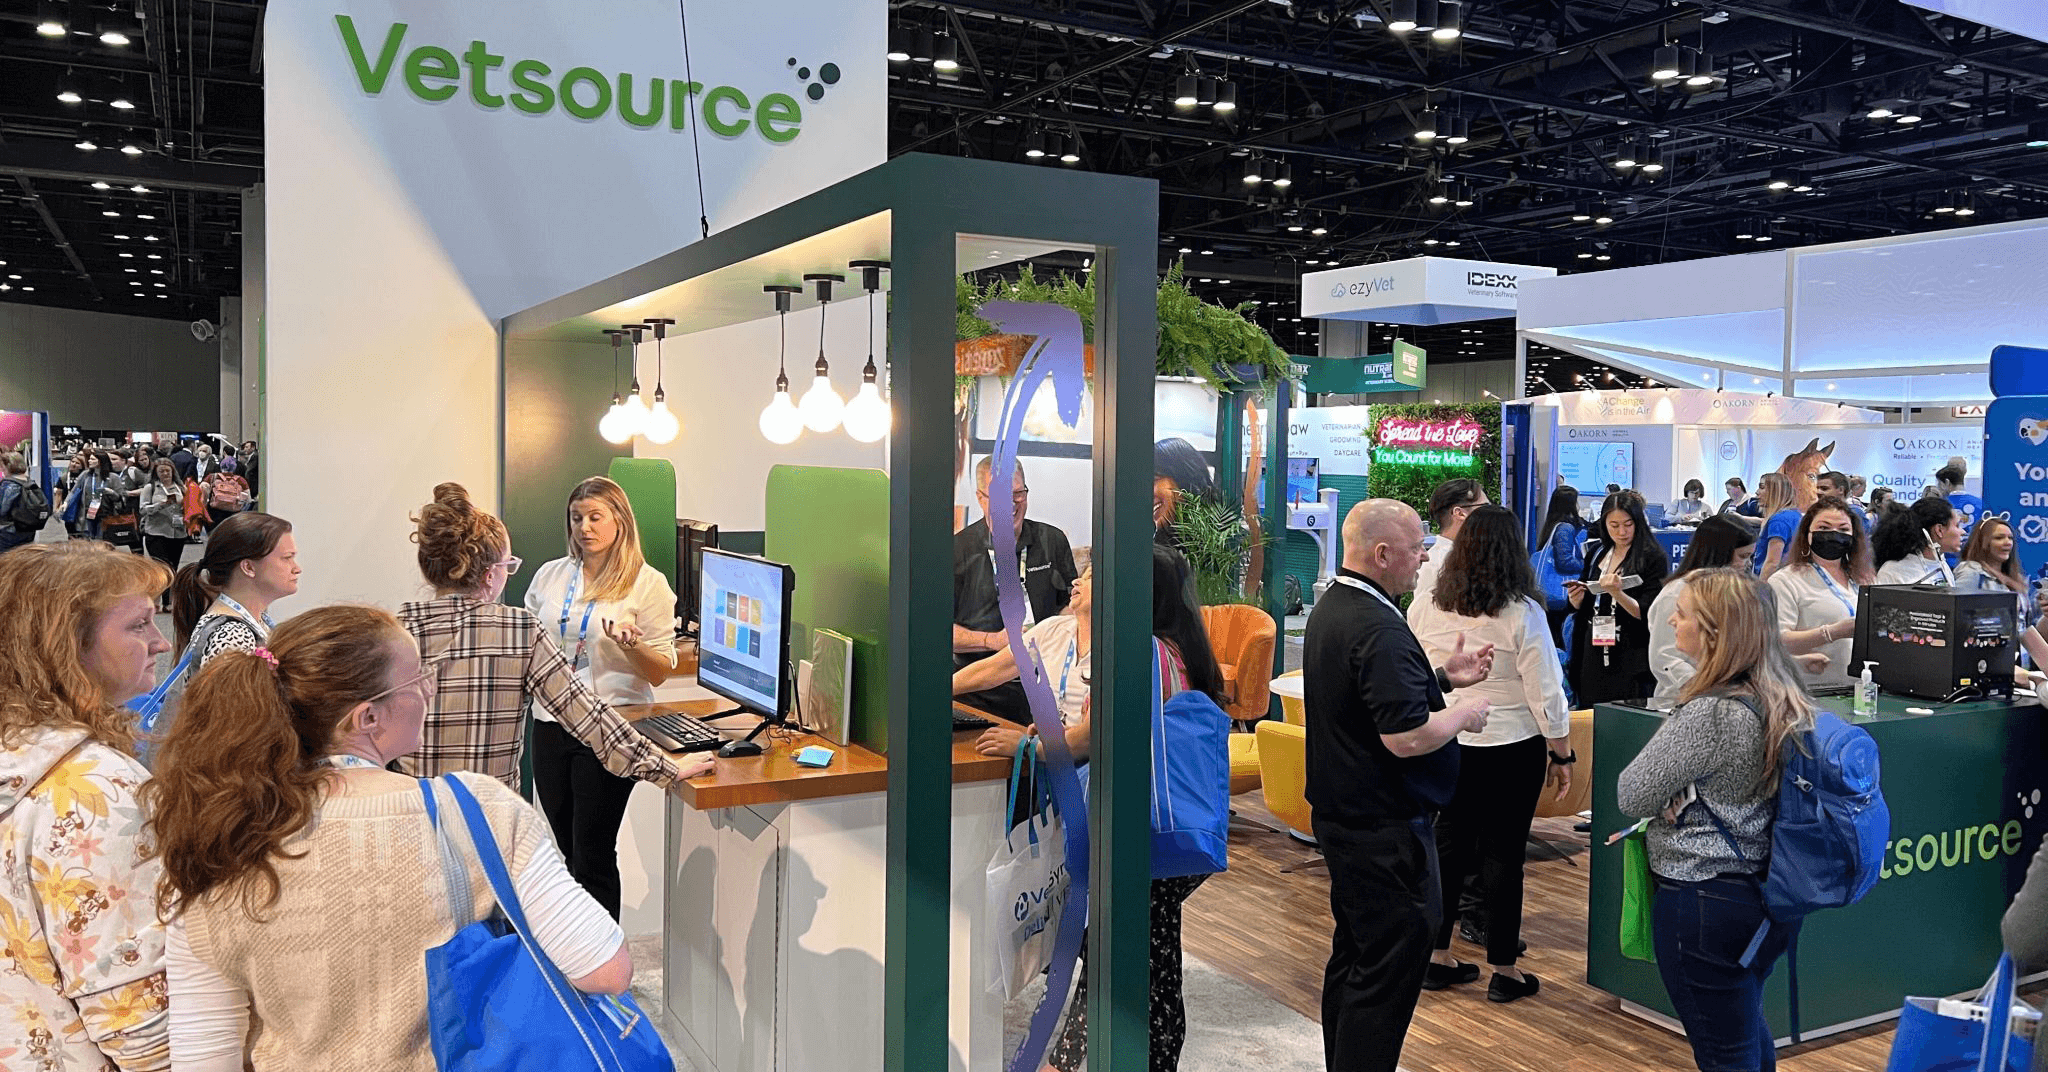 Vetsource booth filled with people at VMX